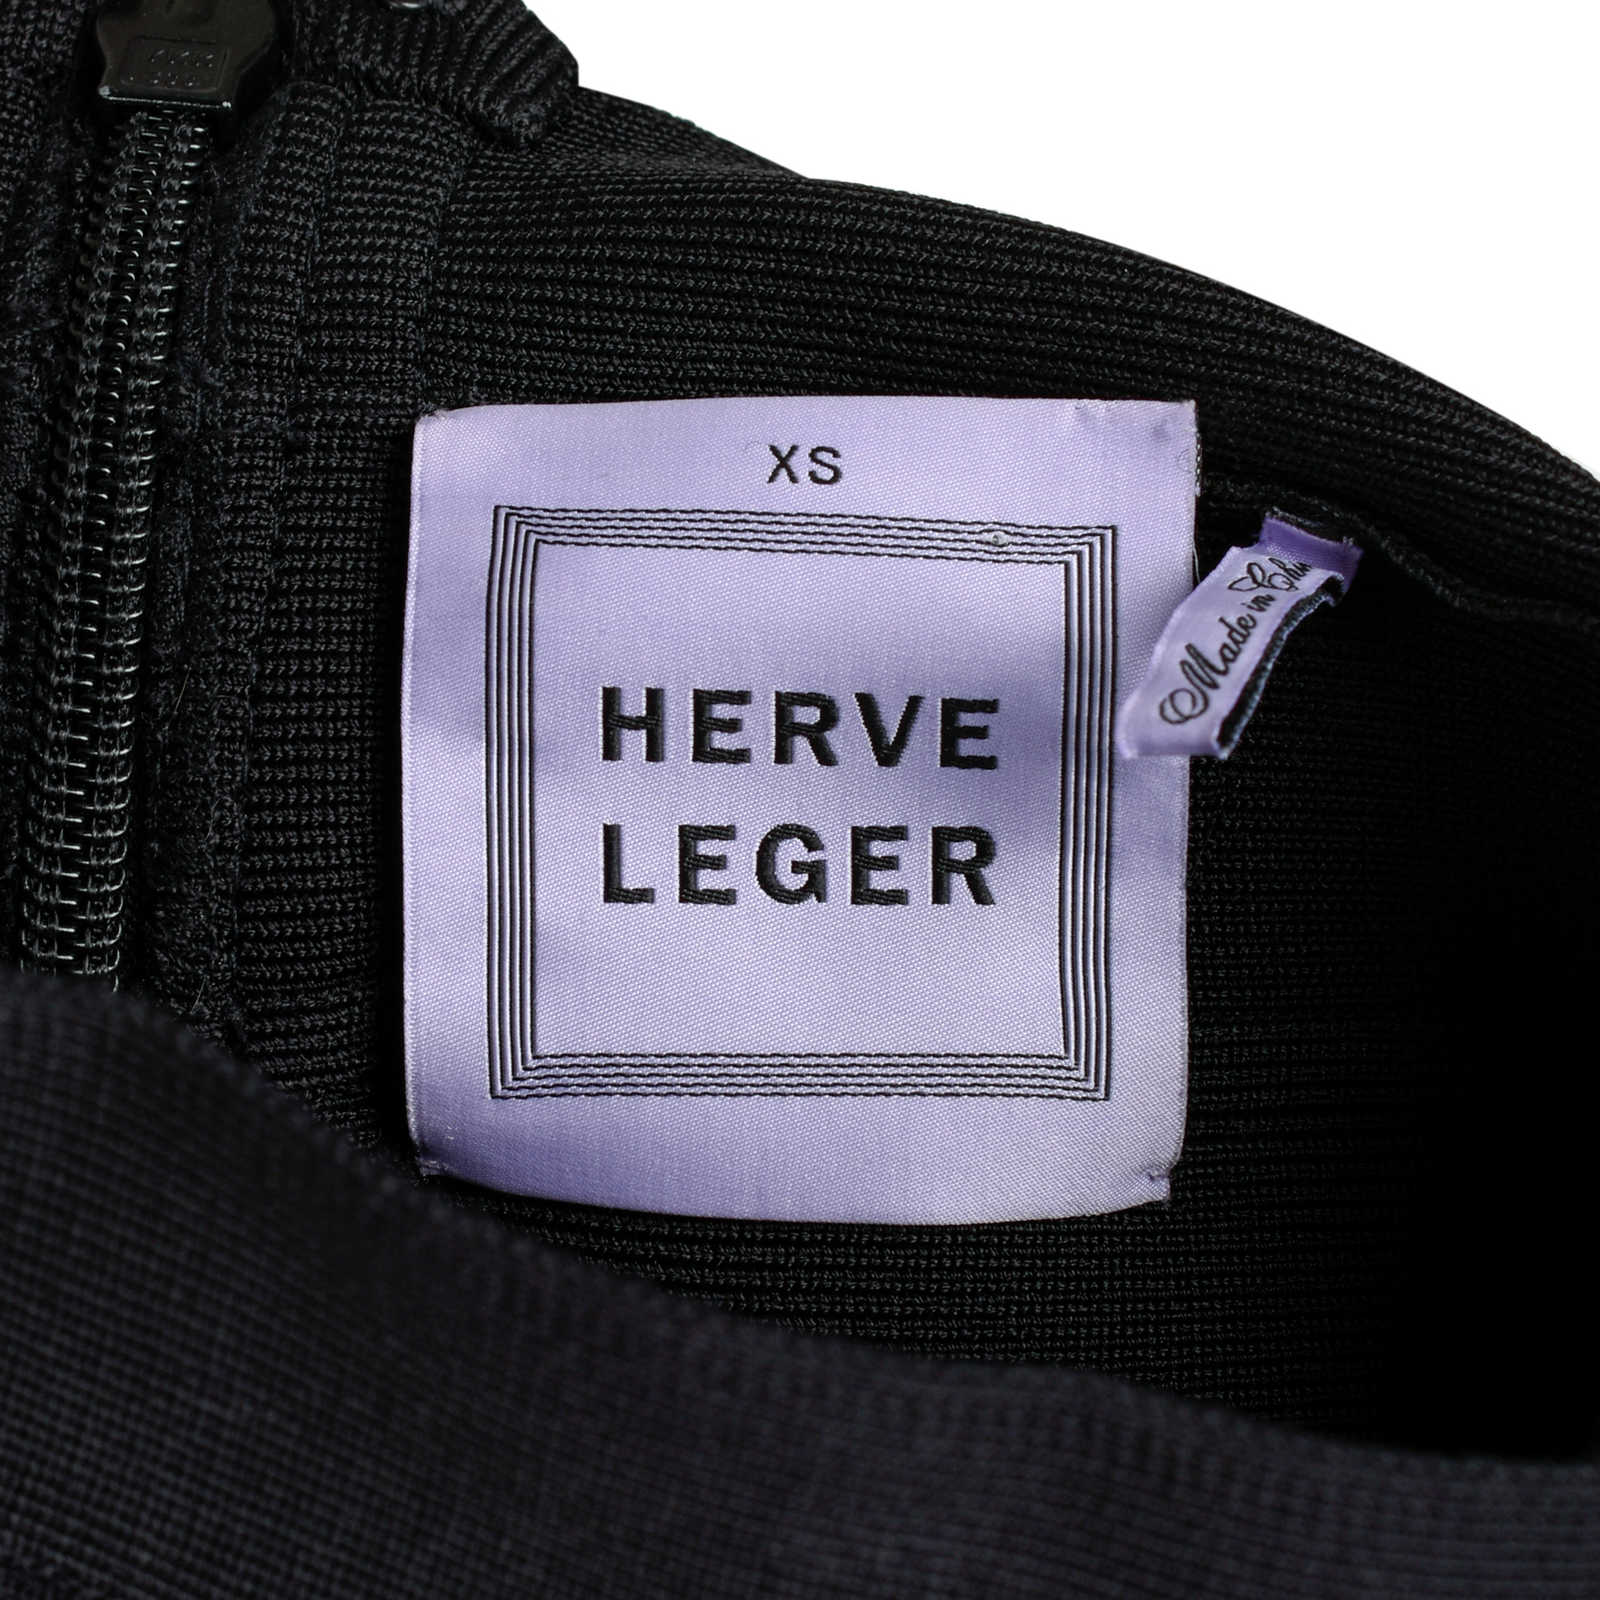 Herve Leger Logo - Authentic Pre Owned Hervé Leger Stretch Mini Skirt PSS 074 00097